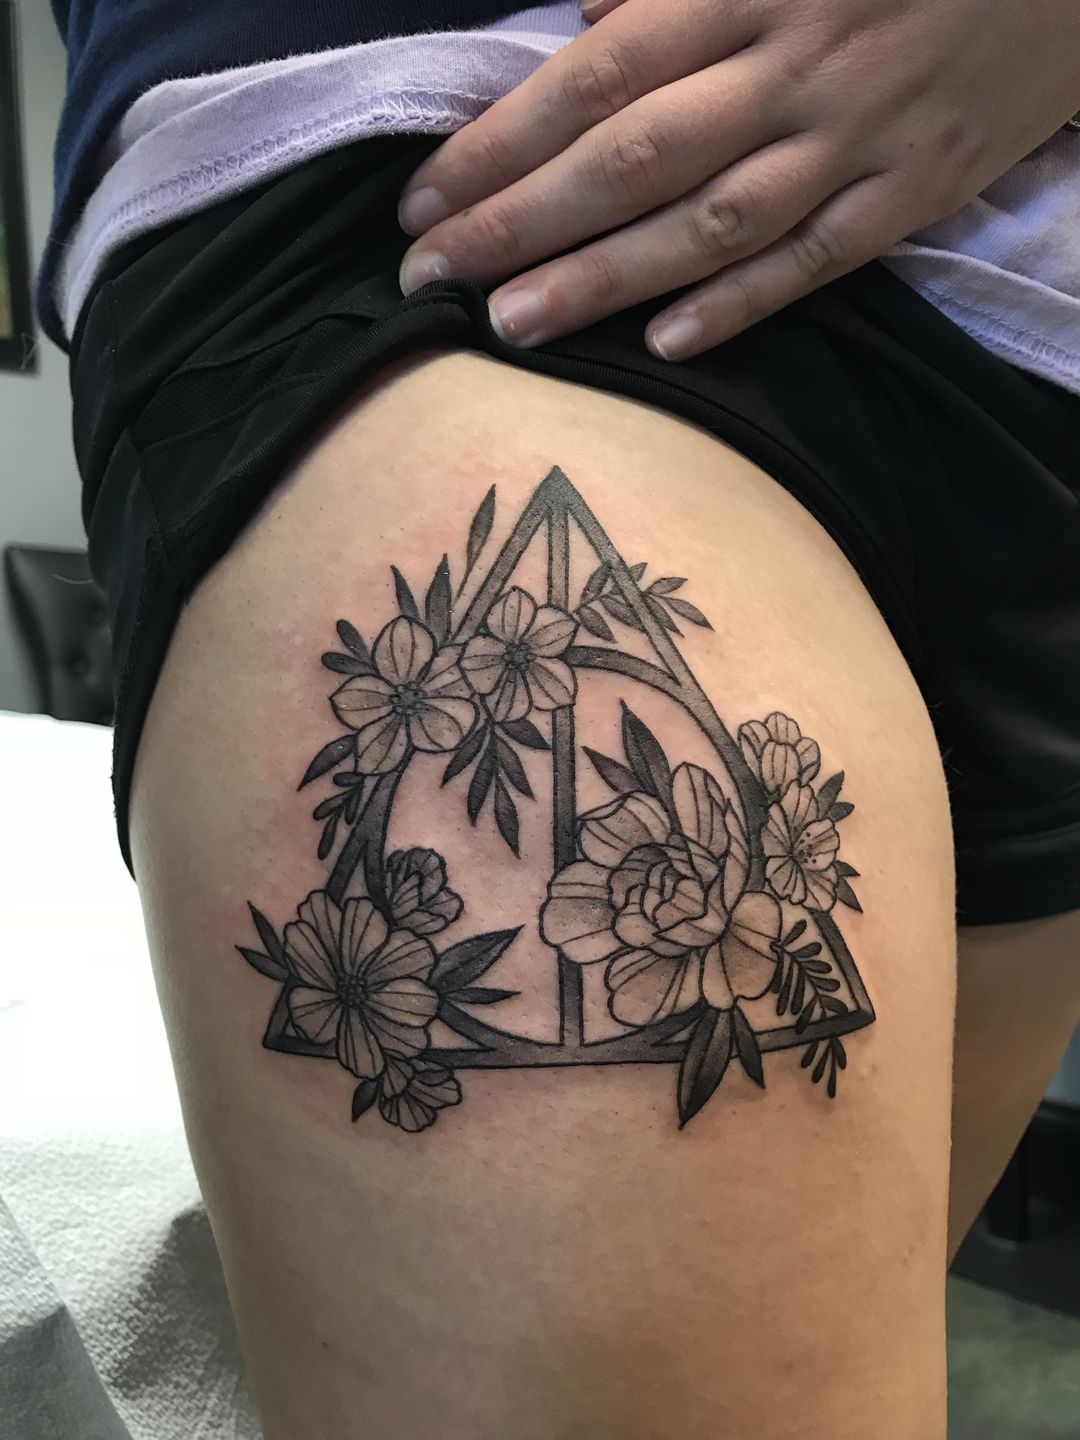 Molly Knox Ostertag  Updates on Twitter Ive spent today drawing  coverups for Harry Potter tattoos in exchange for donations to  httpstcoYN9pW0qkqW  I have a bunch more to do and am